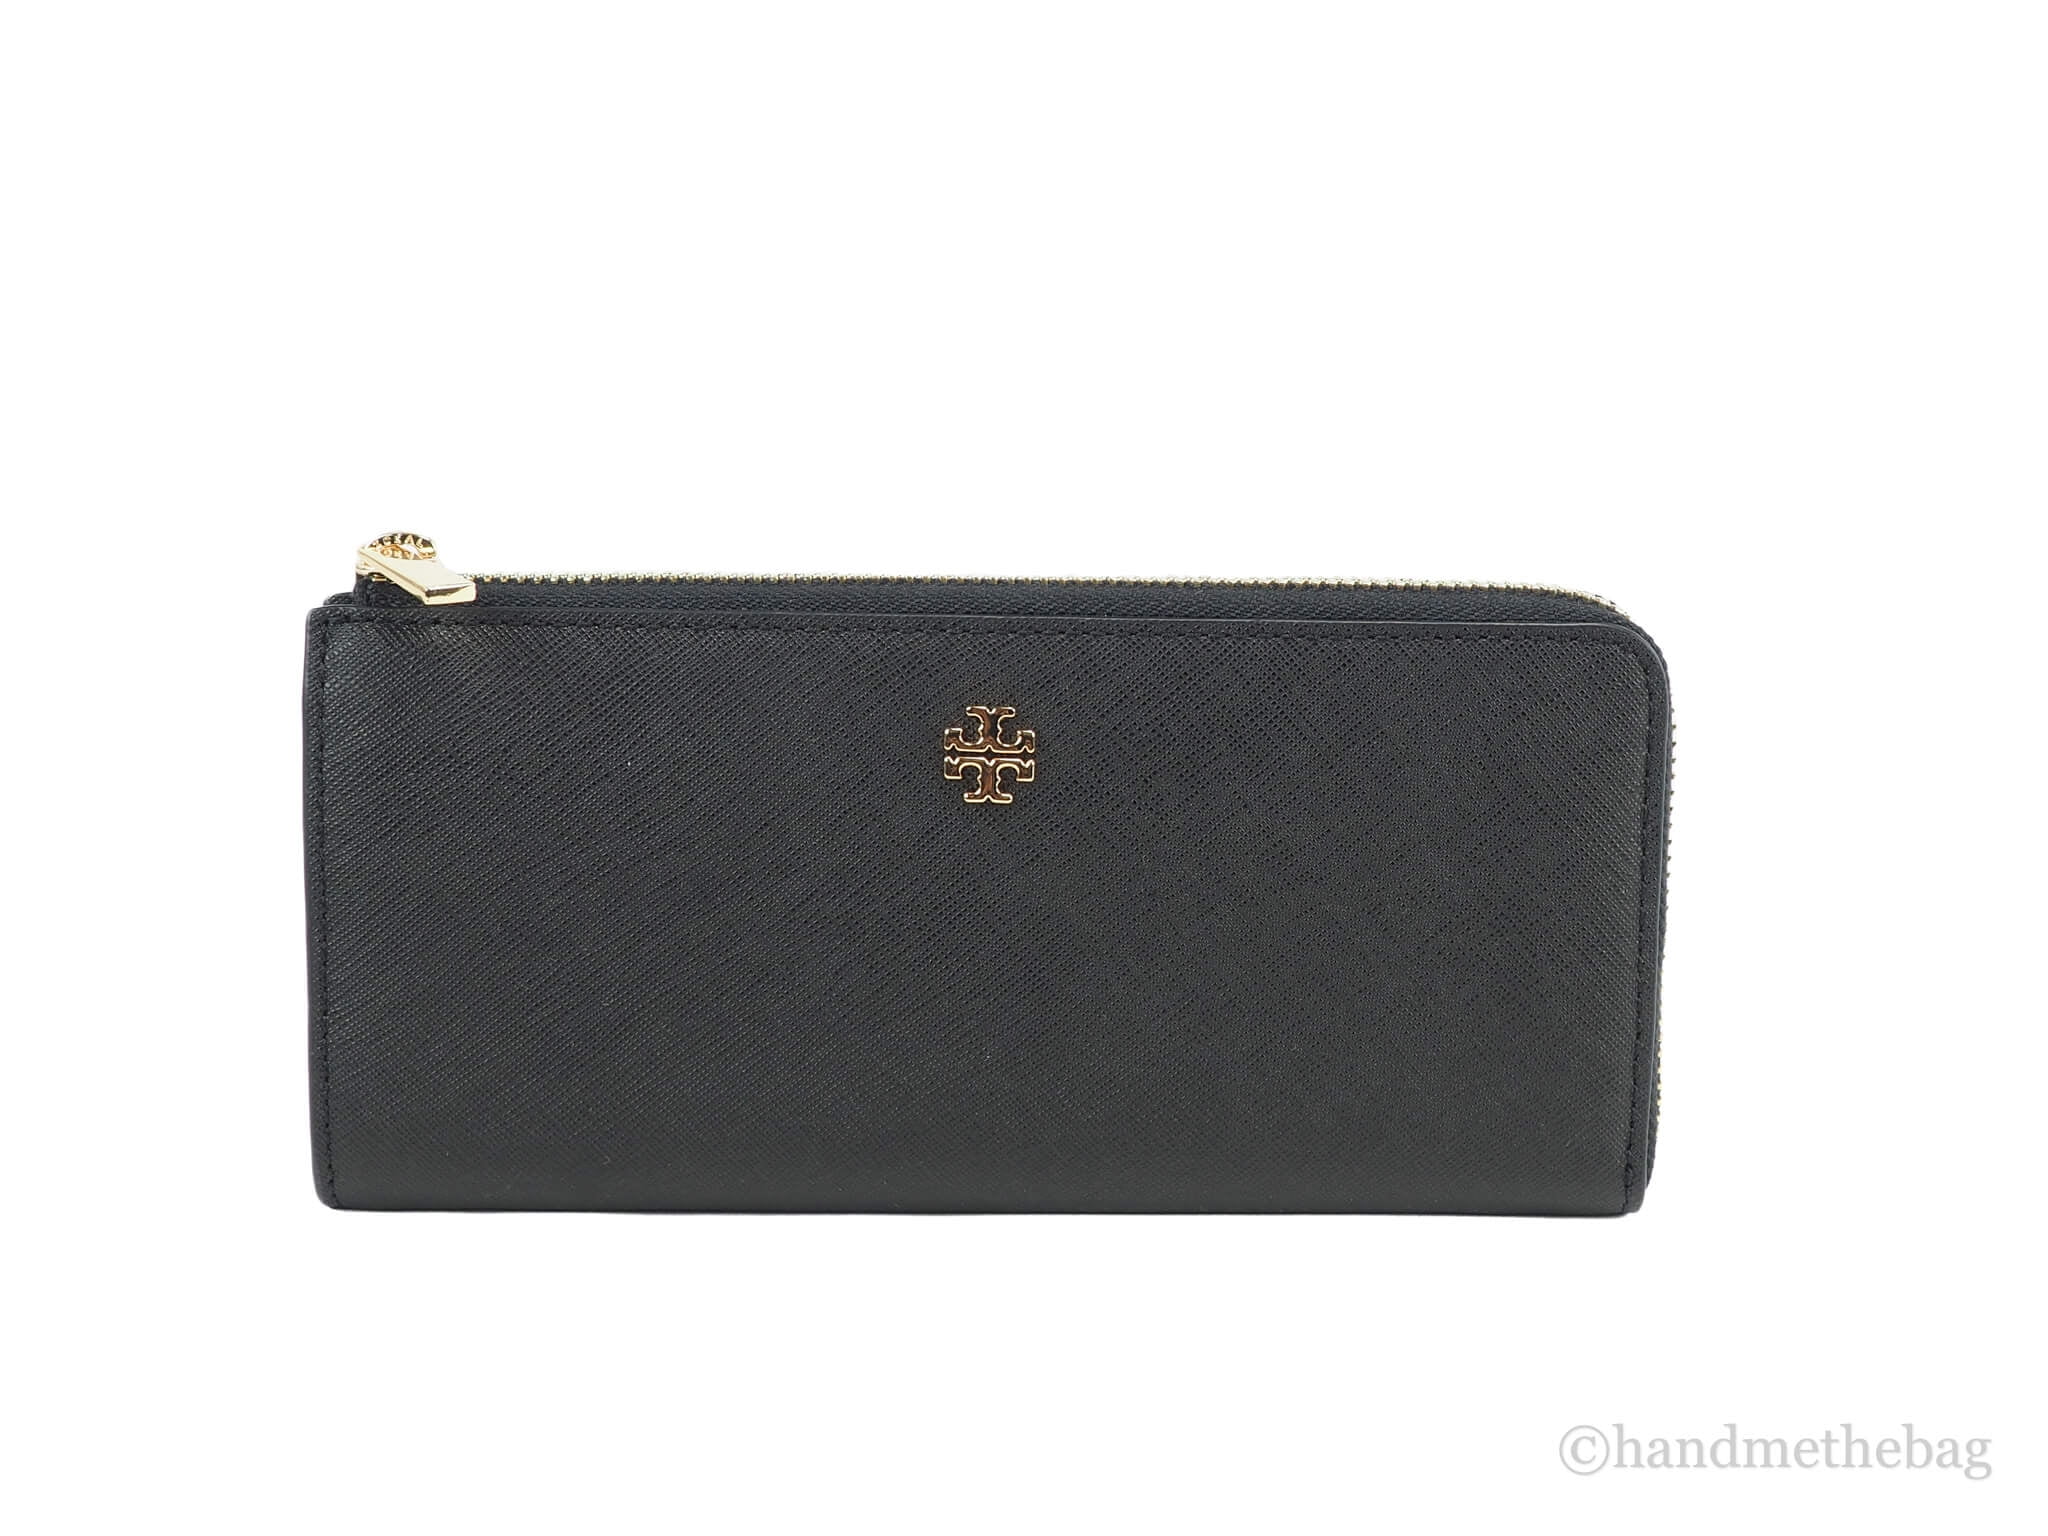 NWT - Tory Burch T Monogram Jacquard Embroidered Continental Wallet | eBay